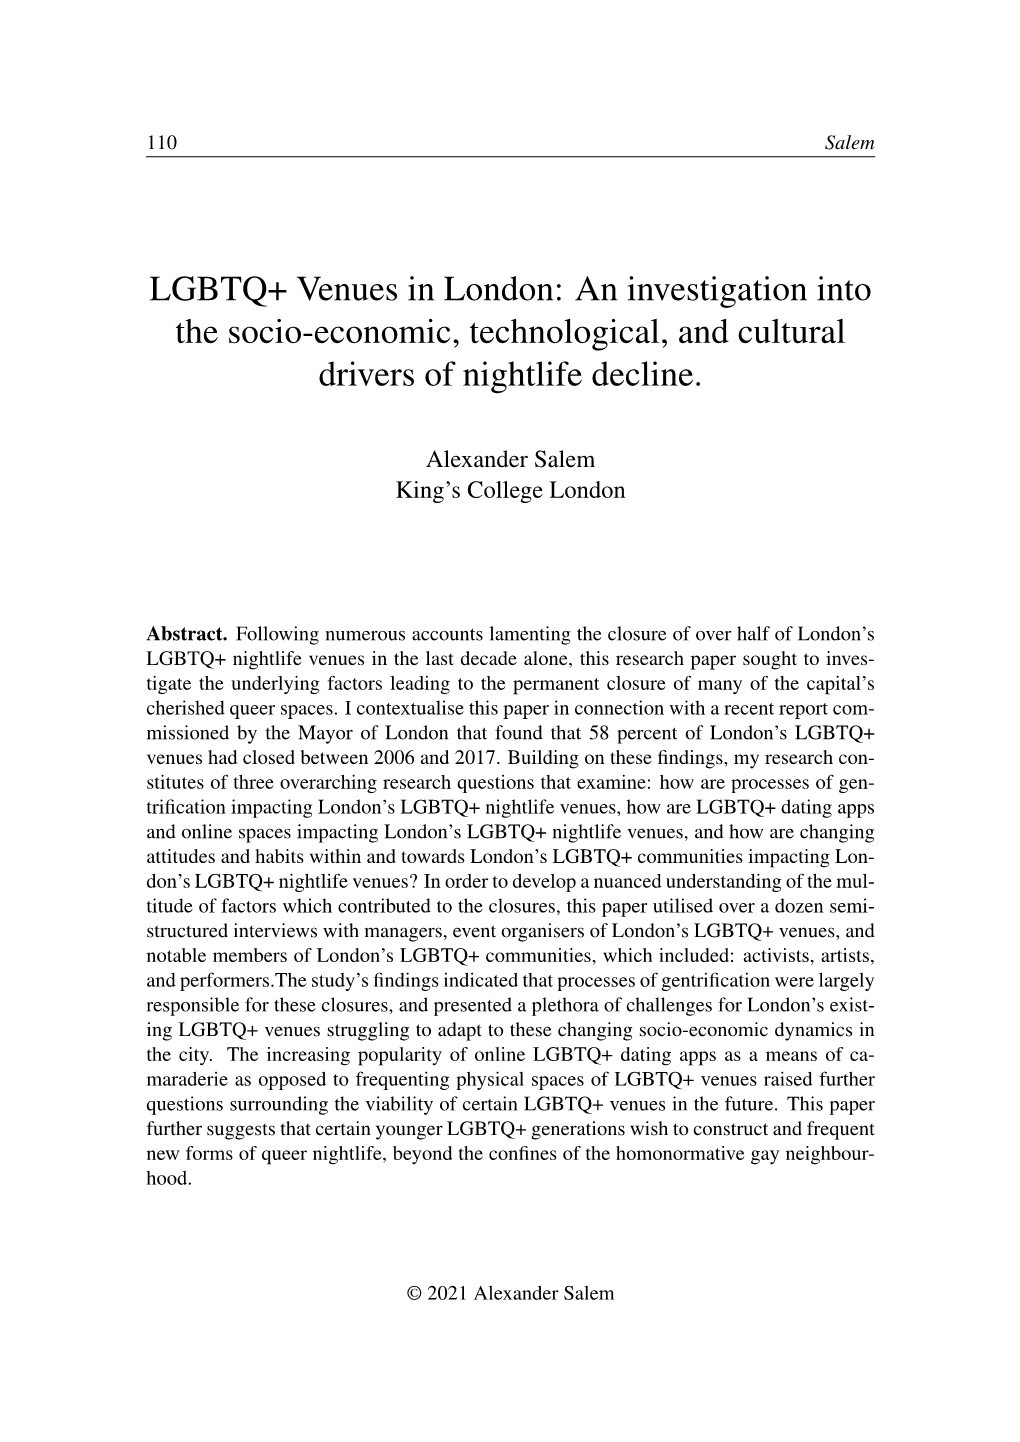 LGBTQ+ Venues in London: an Investigation Into the Socio-Economic, Technological, and Cultural Drivers of Nightlife Decline